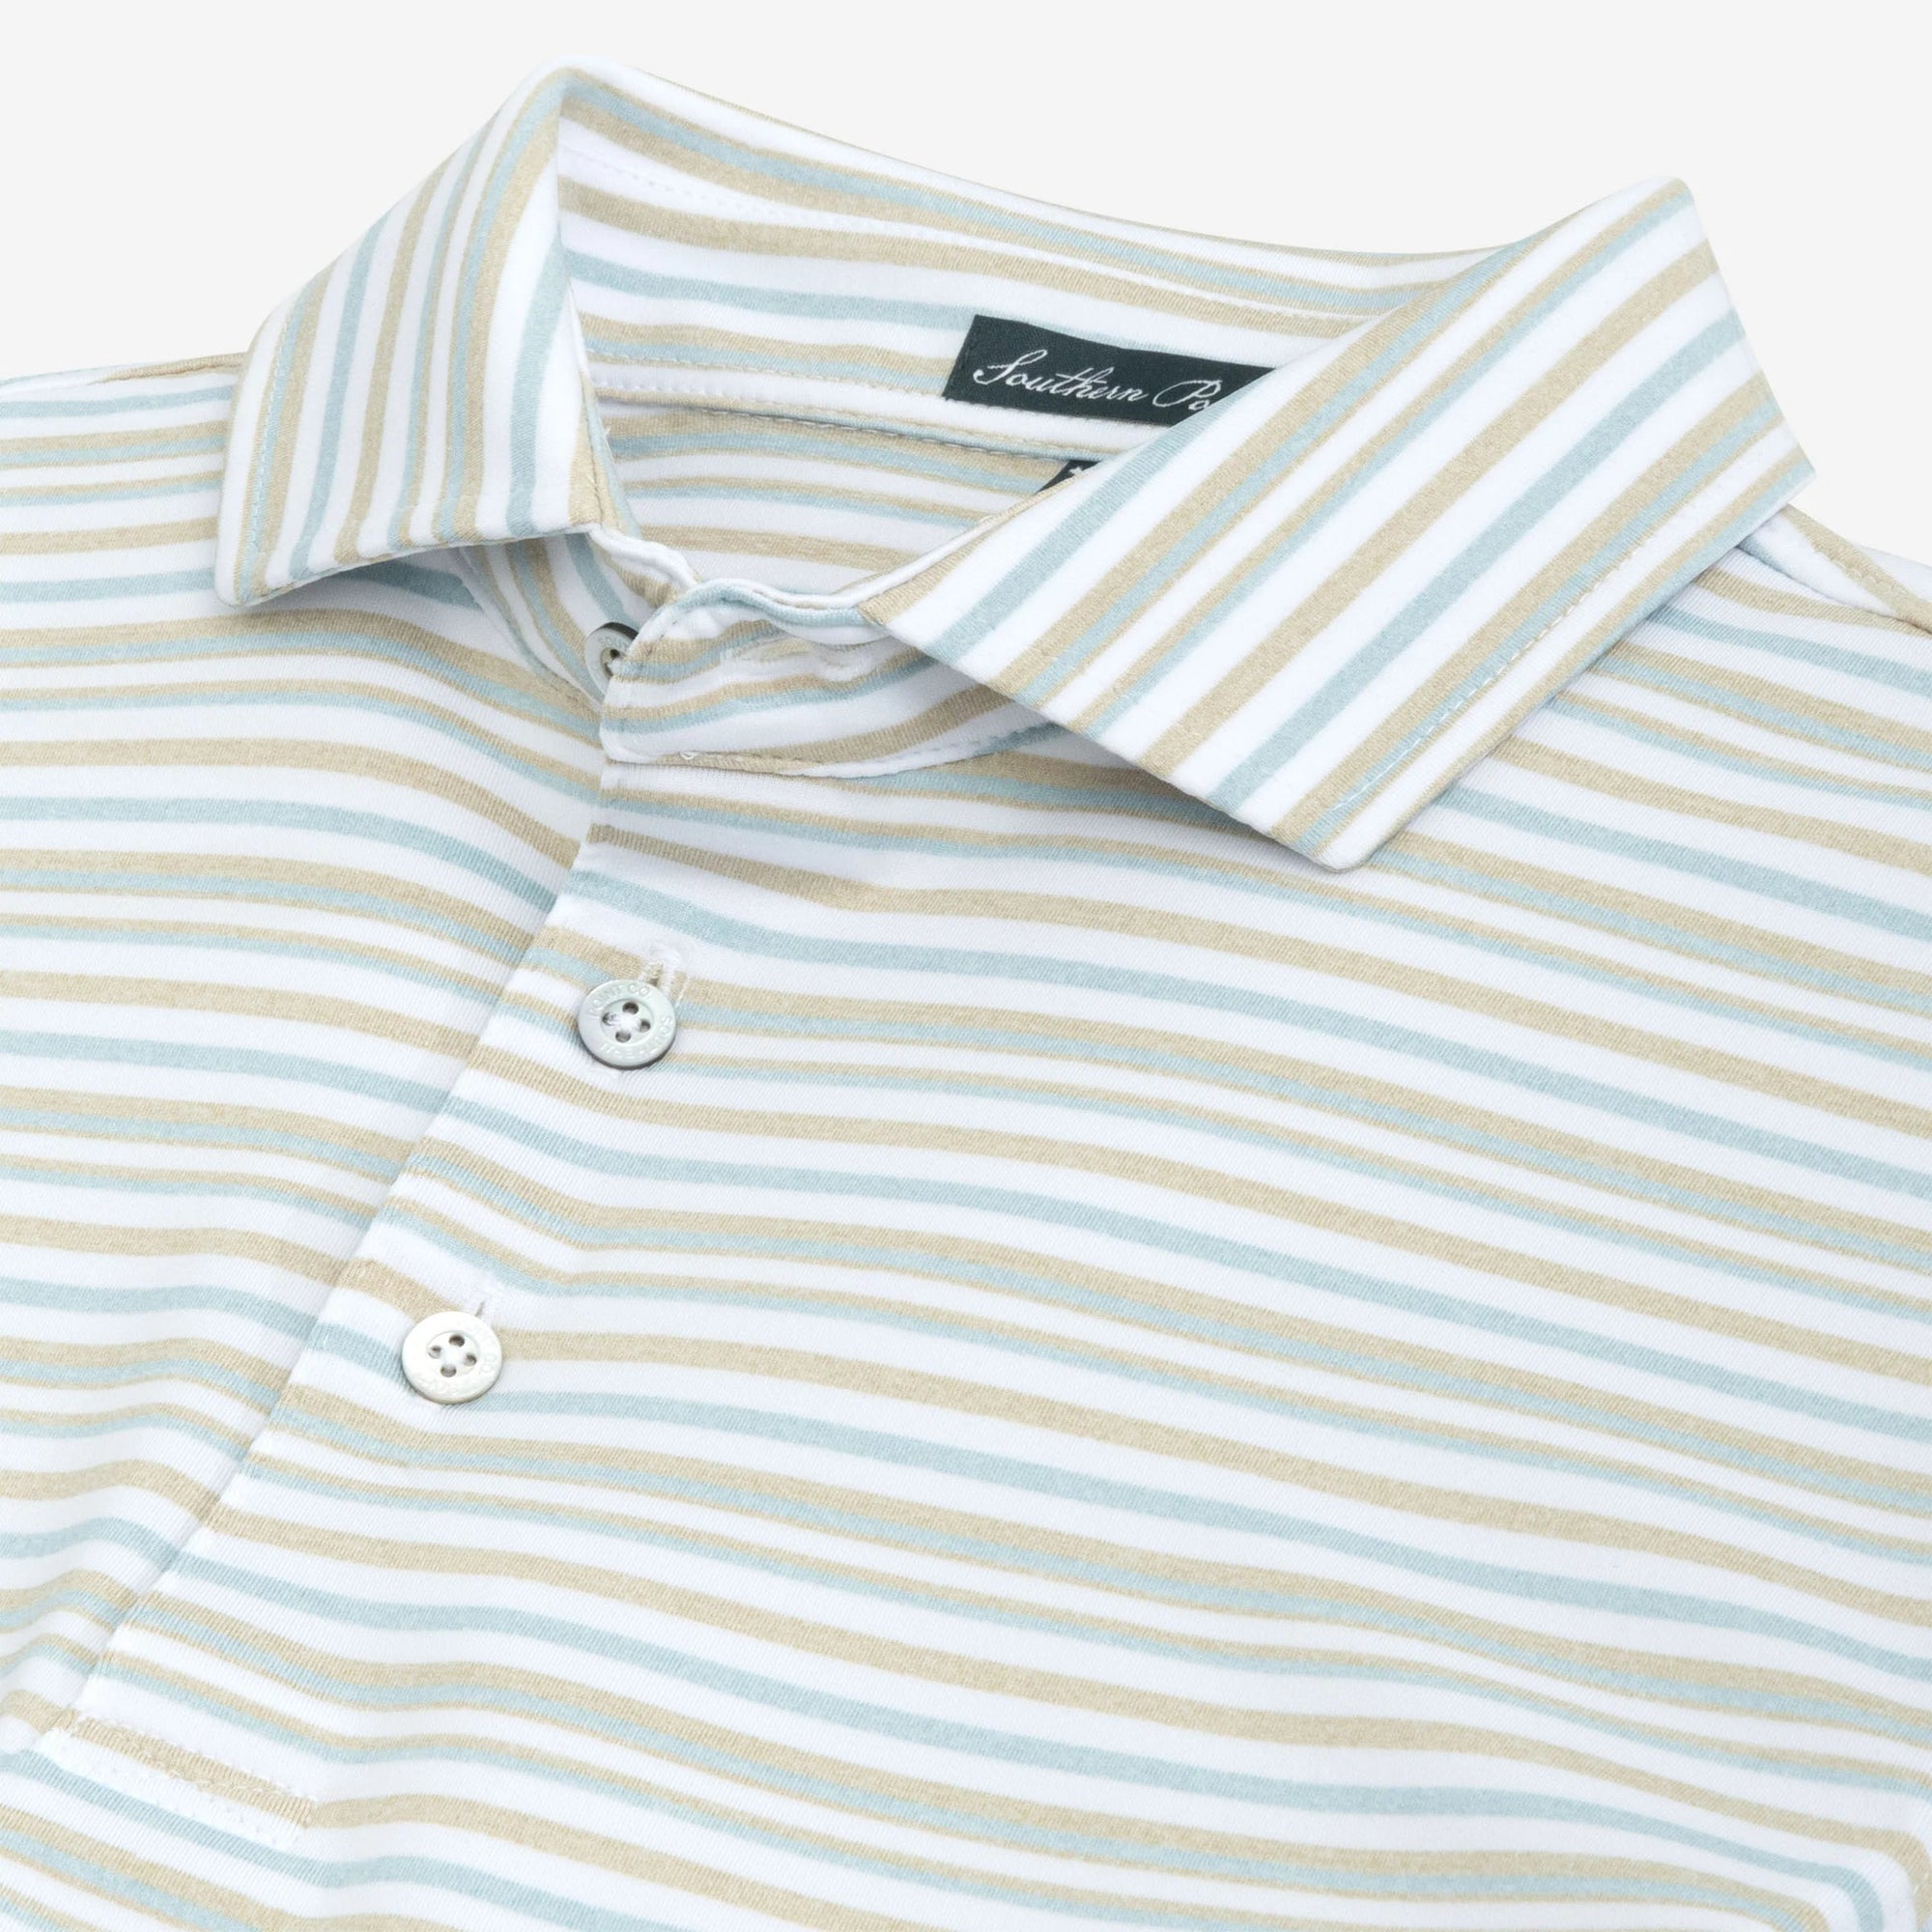 Southern Point Co. Men's Polo Southern Point The Valley Stripe Polo || David's Clothing